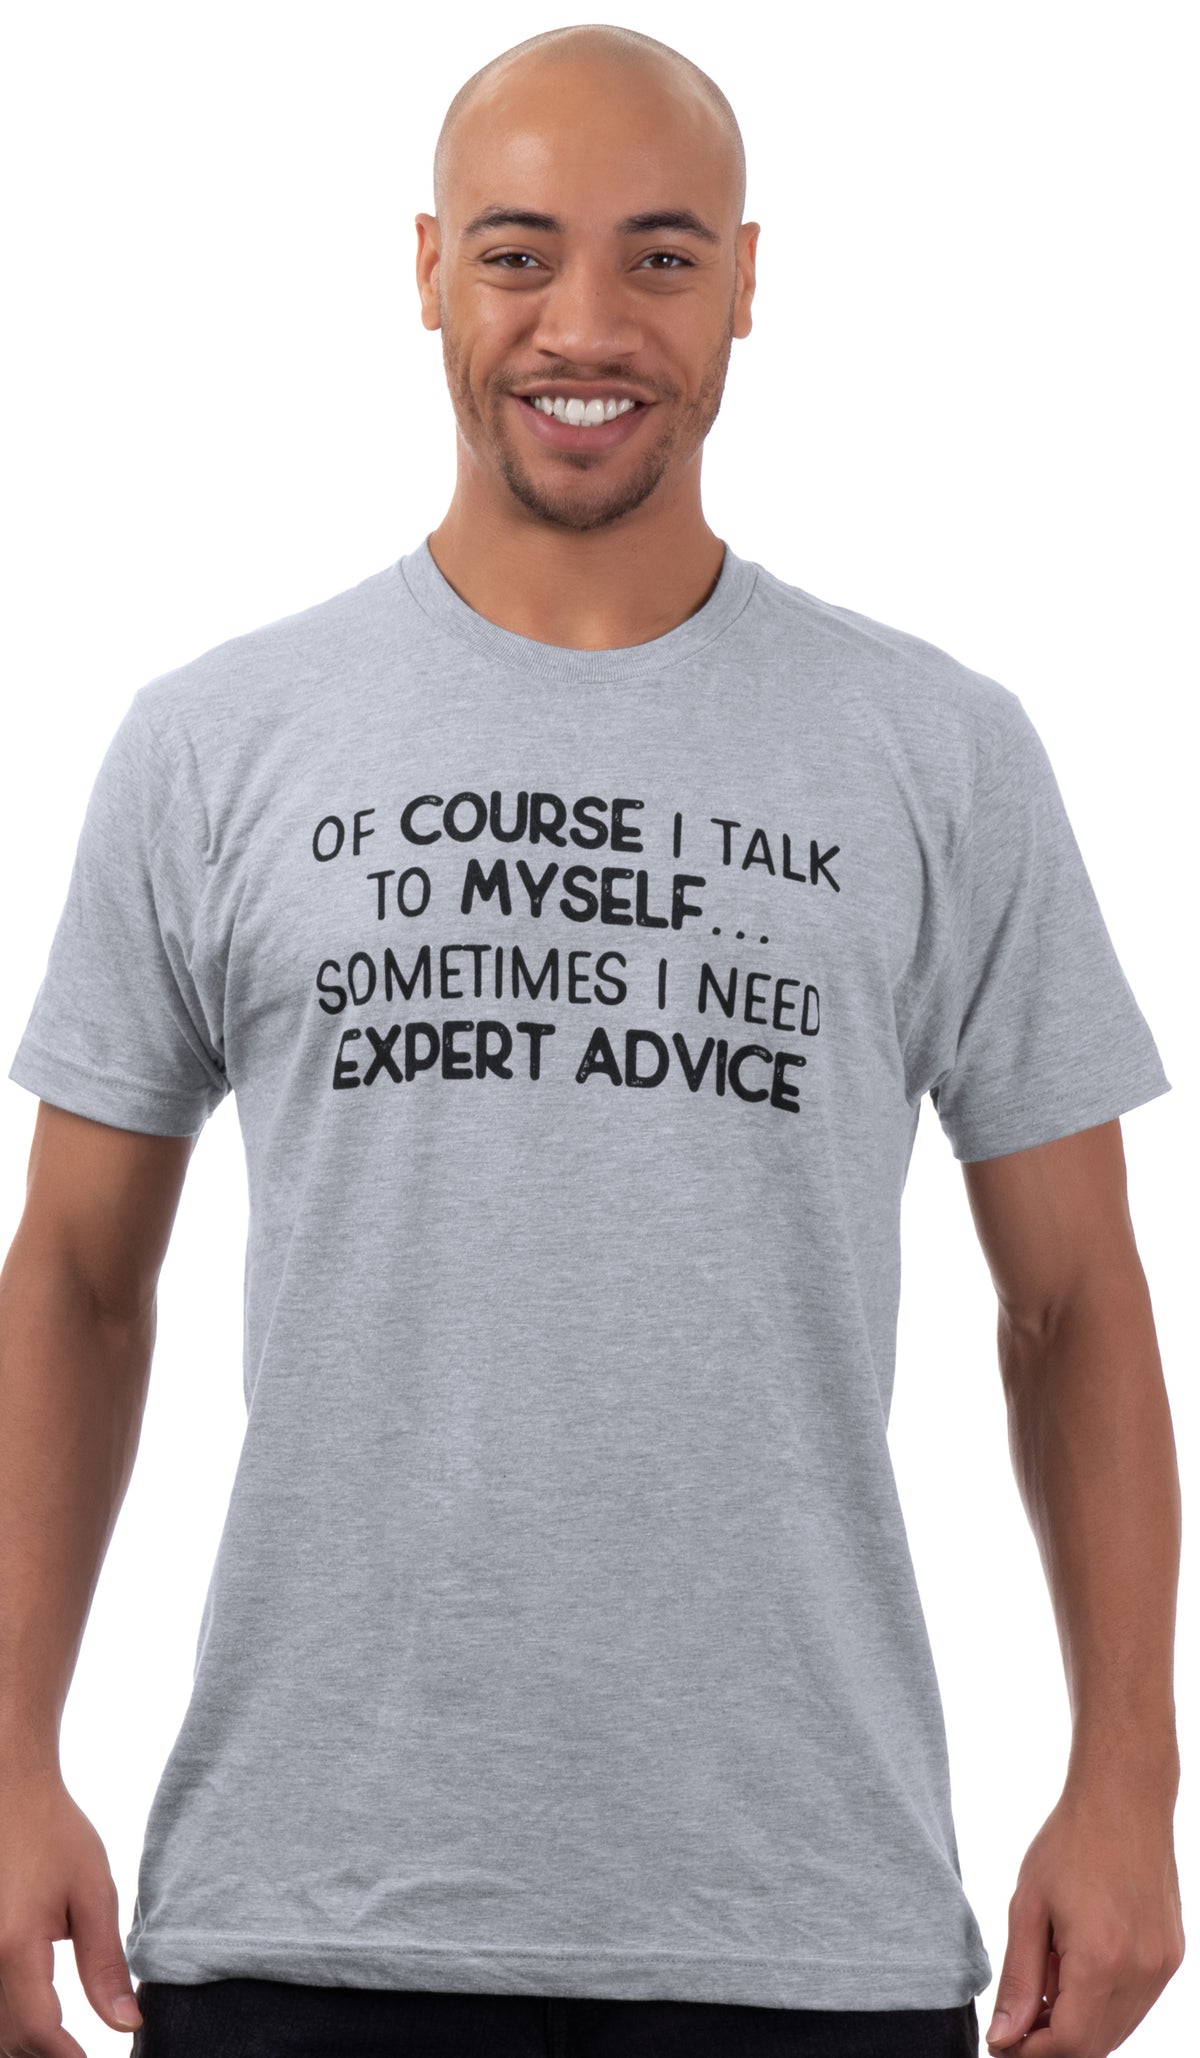 Of Course I Talk to Myself - Sometimes I need Expert Advice | Funny Dad Joke Grandpa Humor Sarcastic Saying T-Shirt for Men